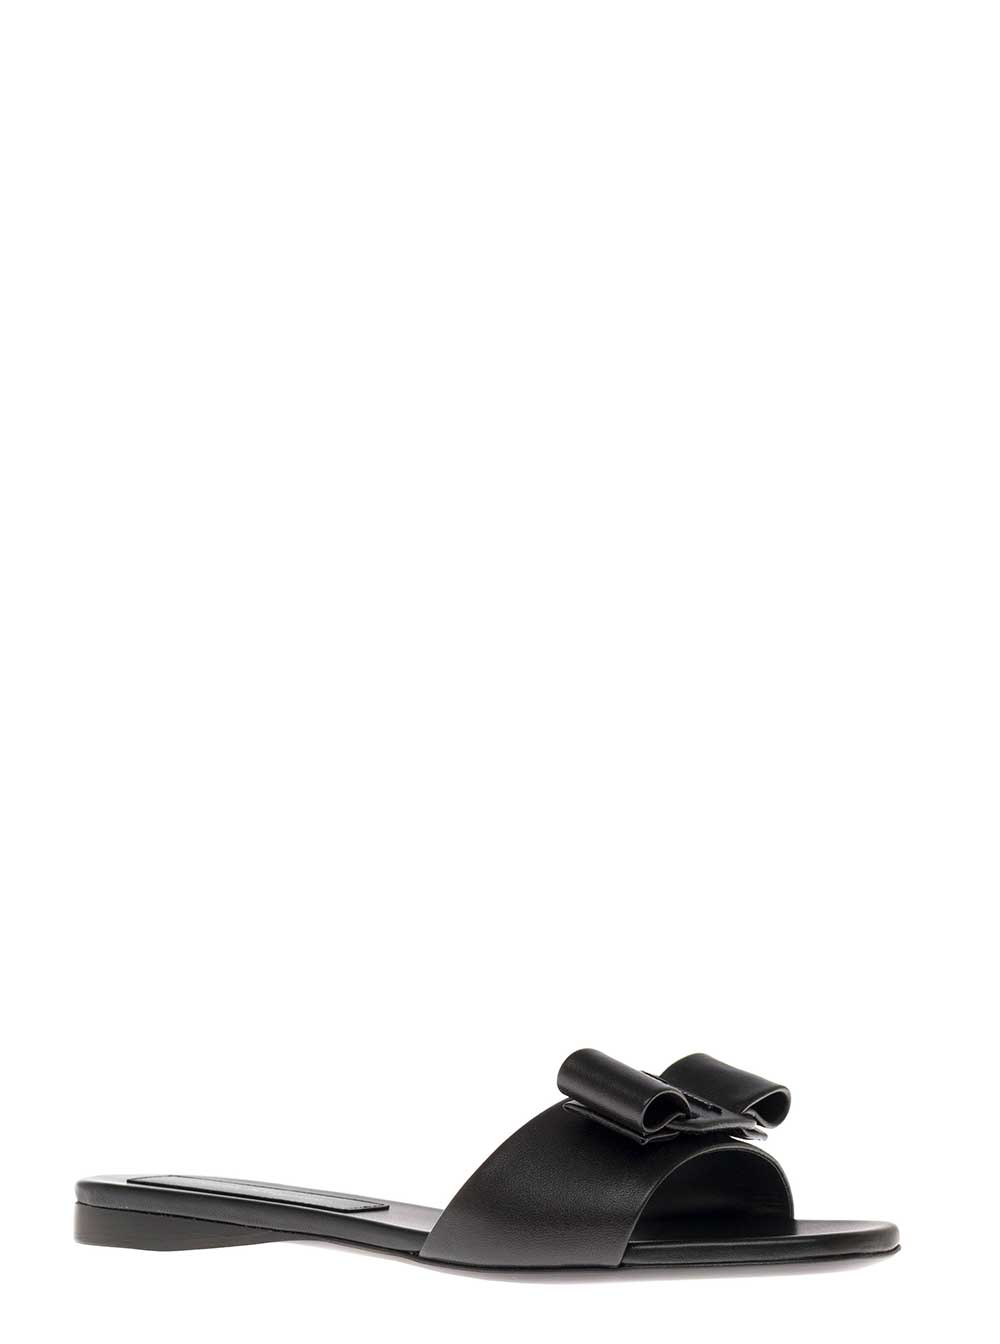 Salvatore Ferragamo Vicky Black Leather Sandals With Bow